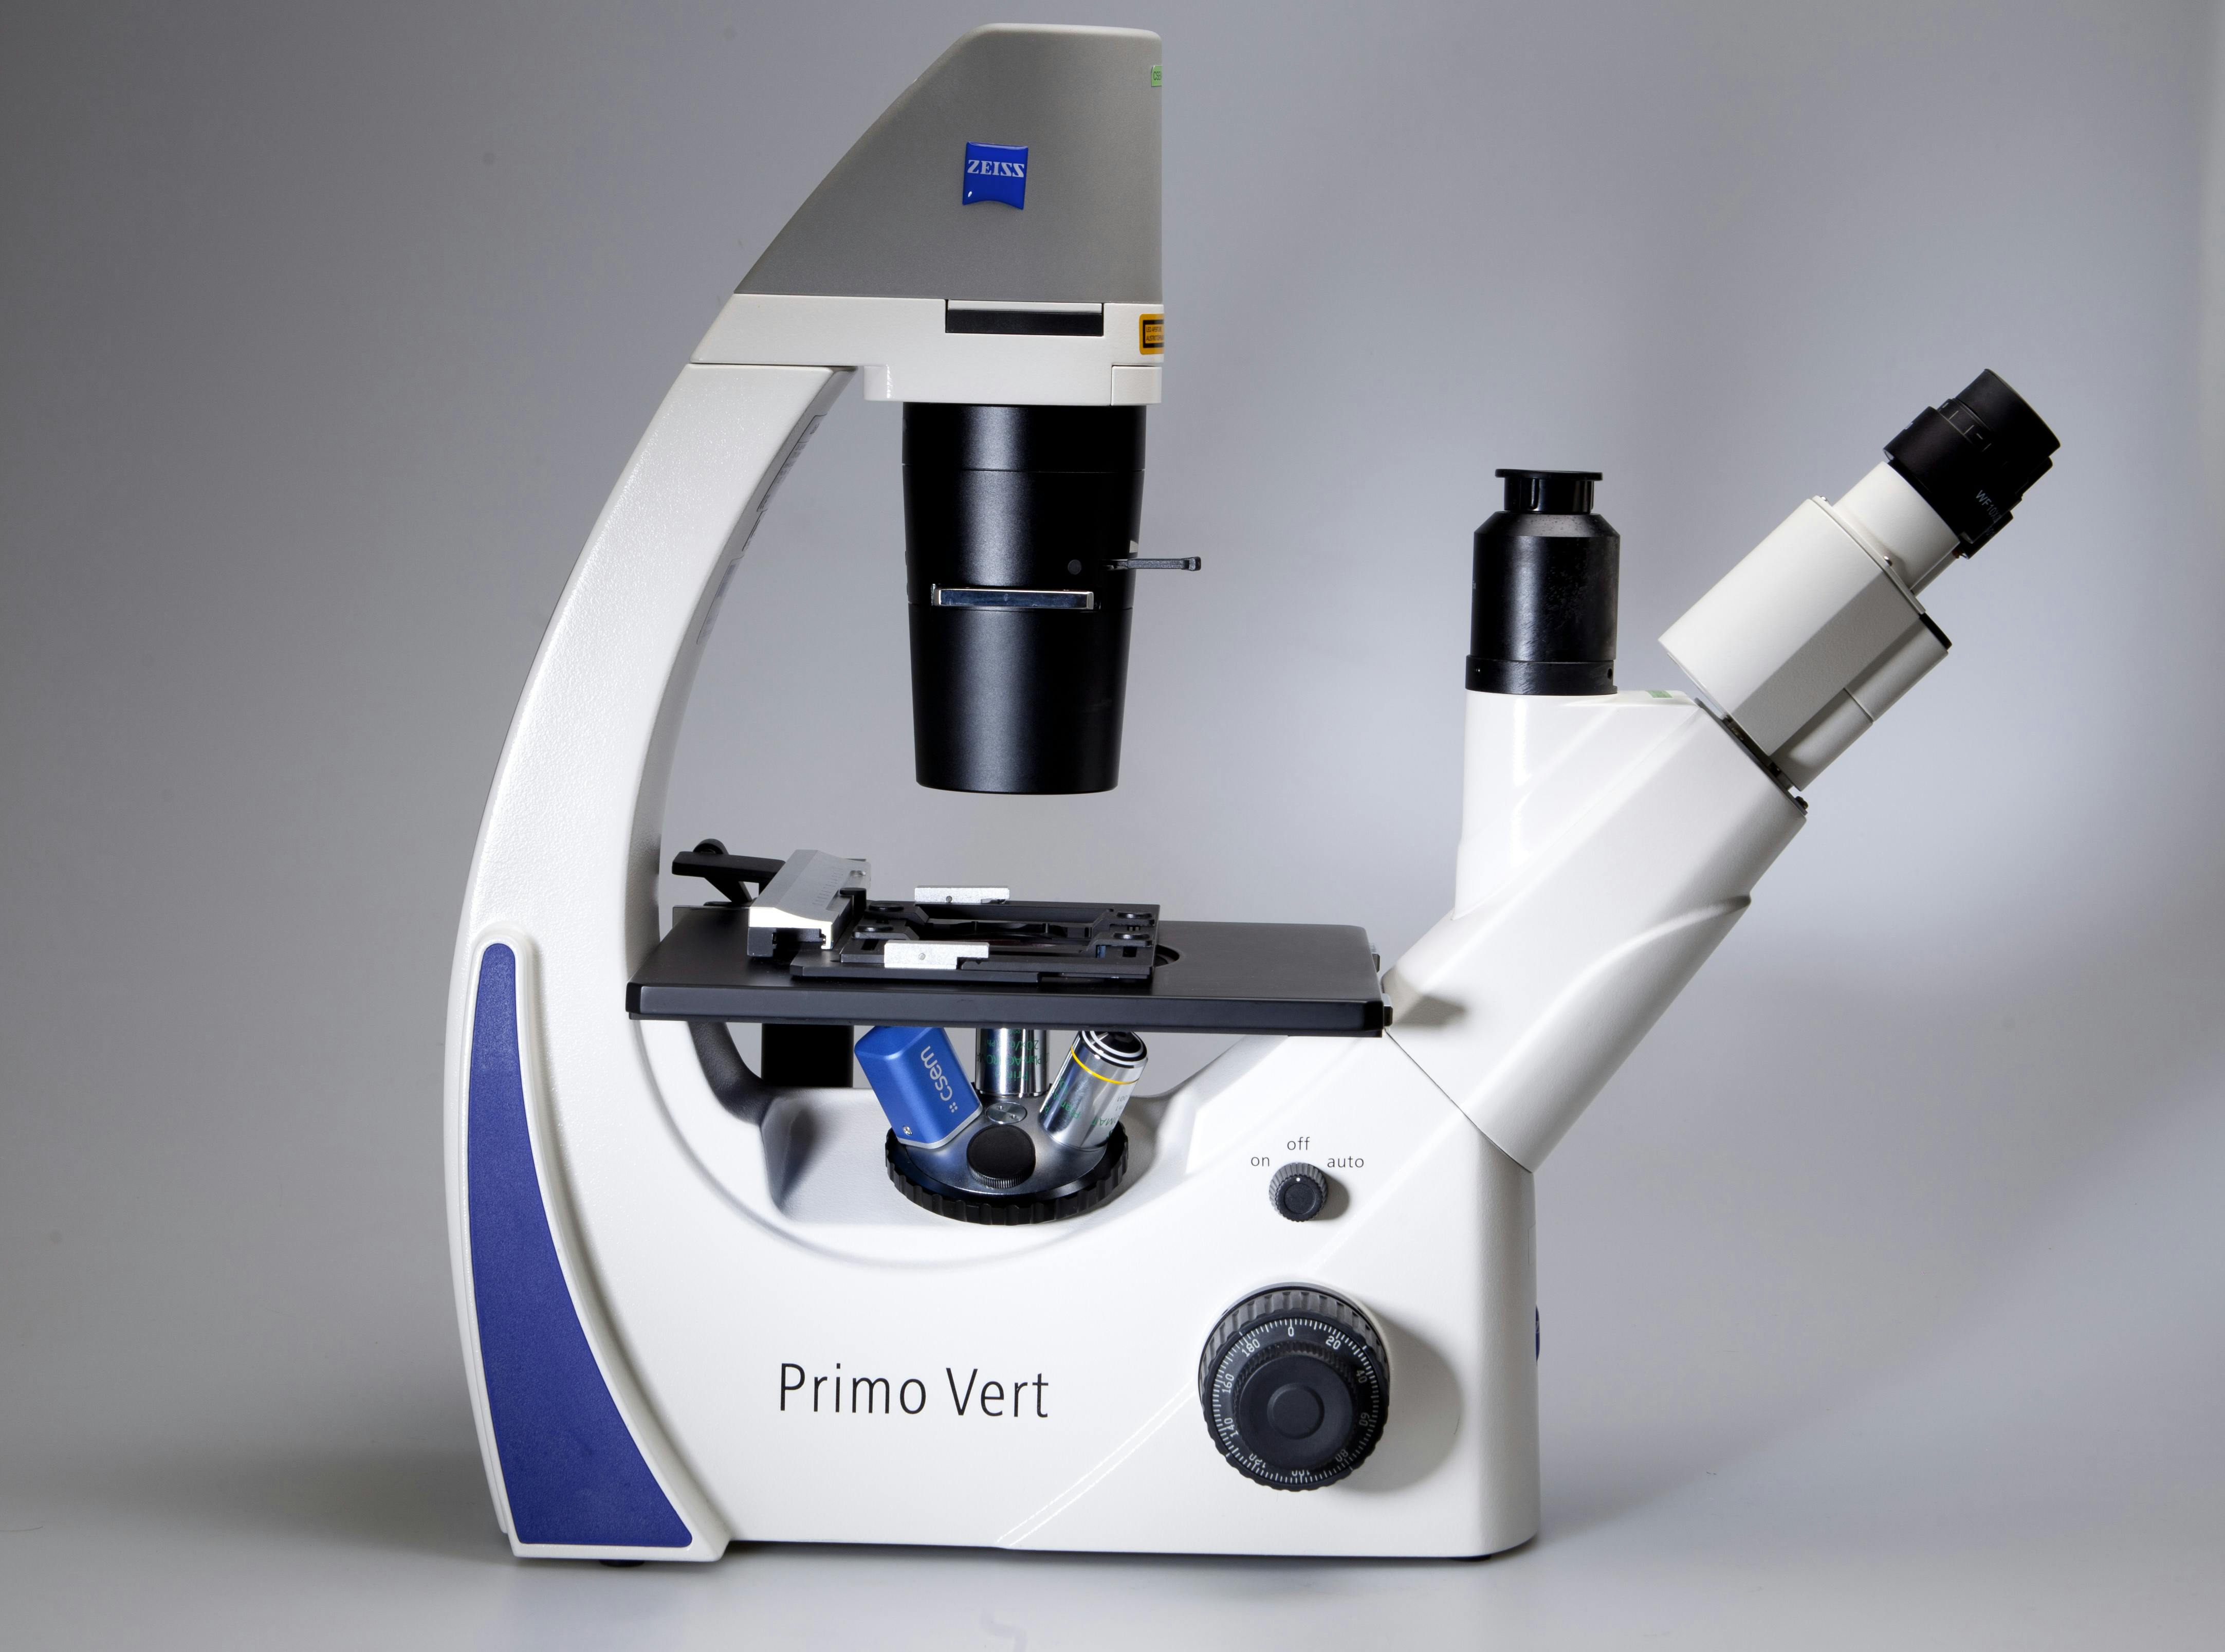 DEMOX reader can be directly mounted on most of microscopes that are regularly used in biology.